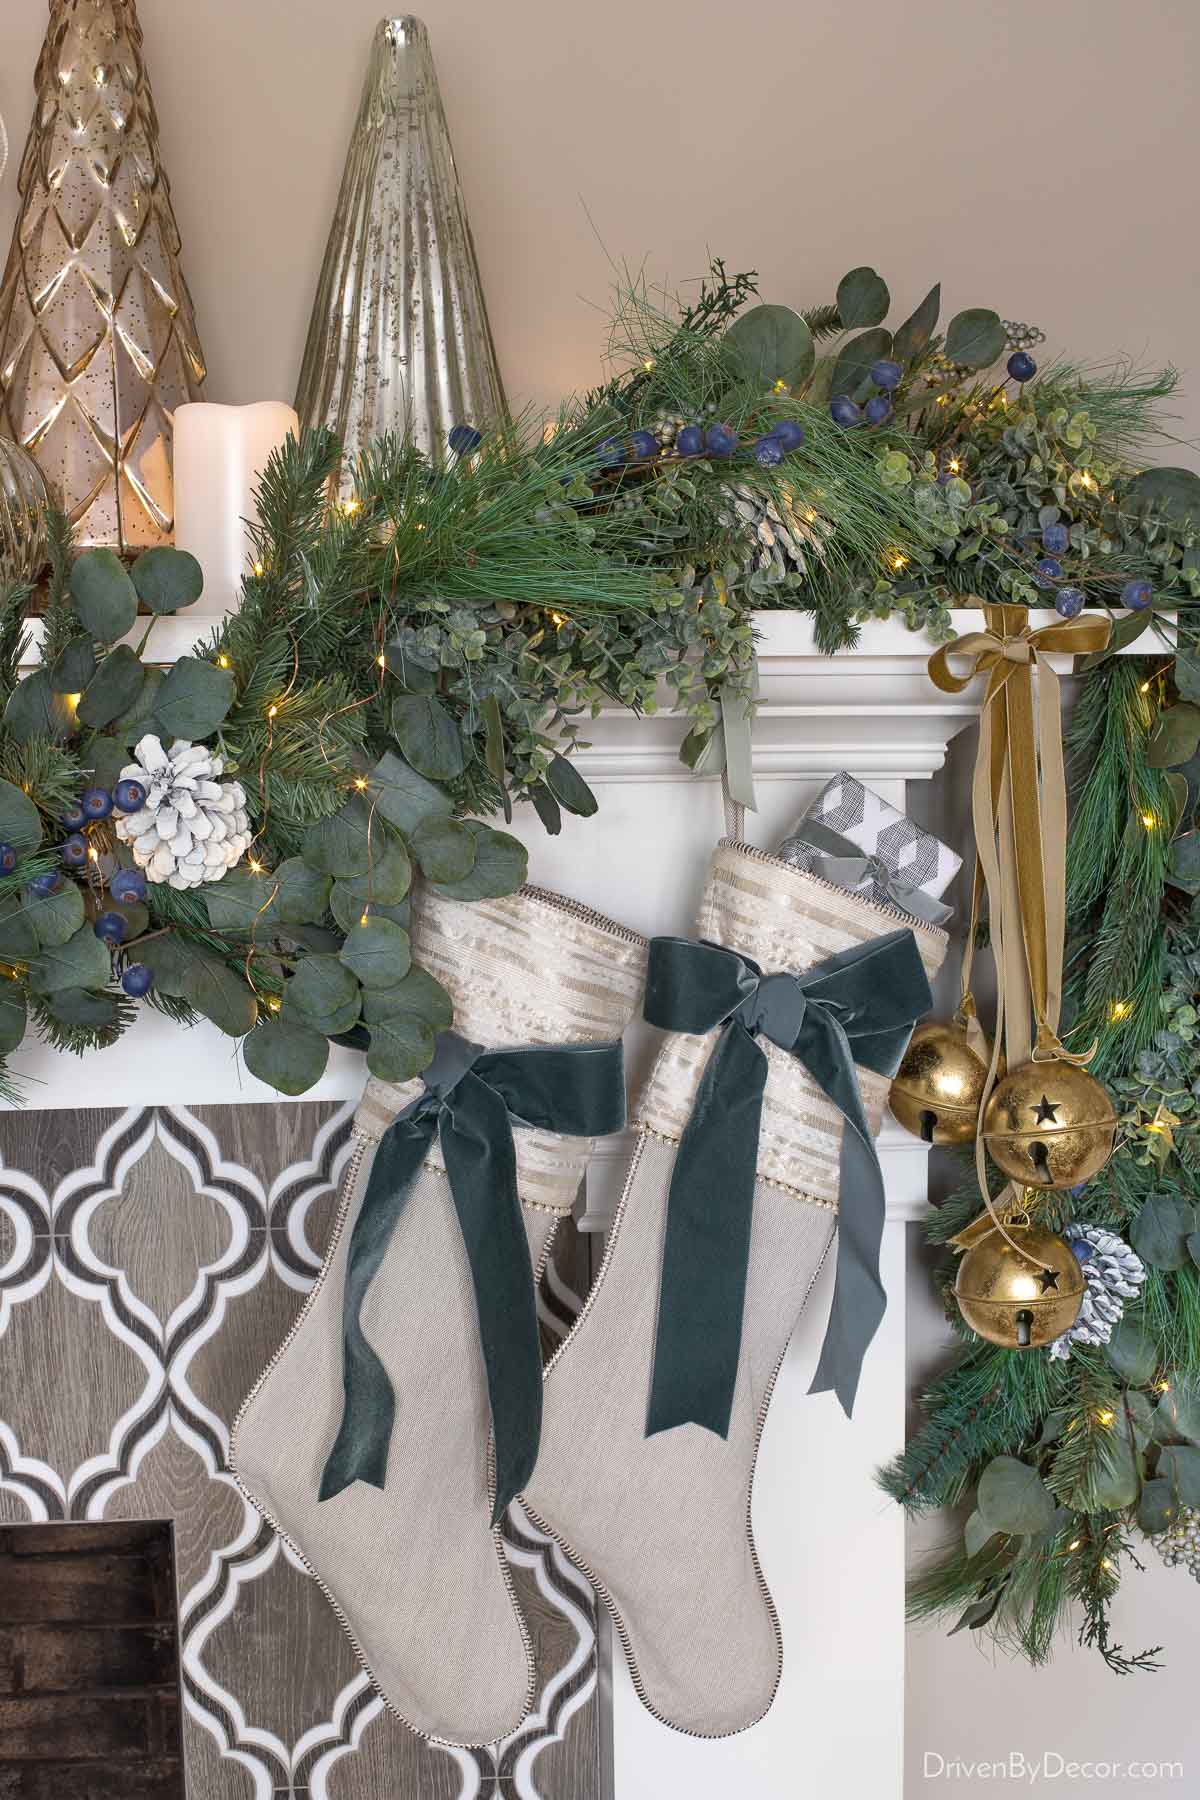 Fireplace mantel layered with greenery, metallic trees, and battery operated candles